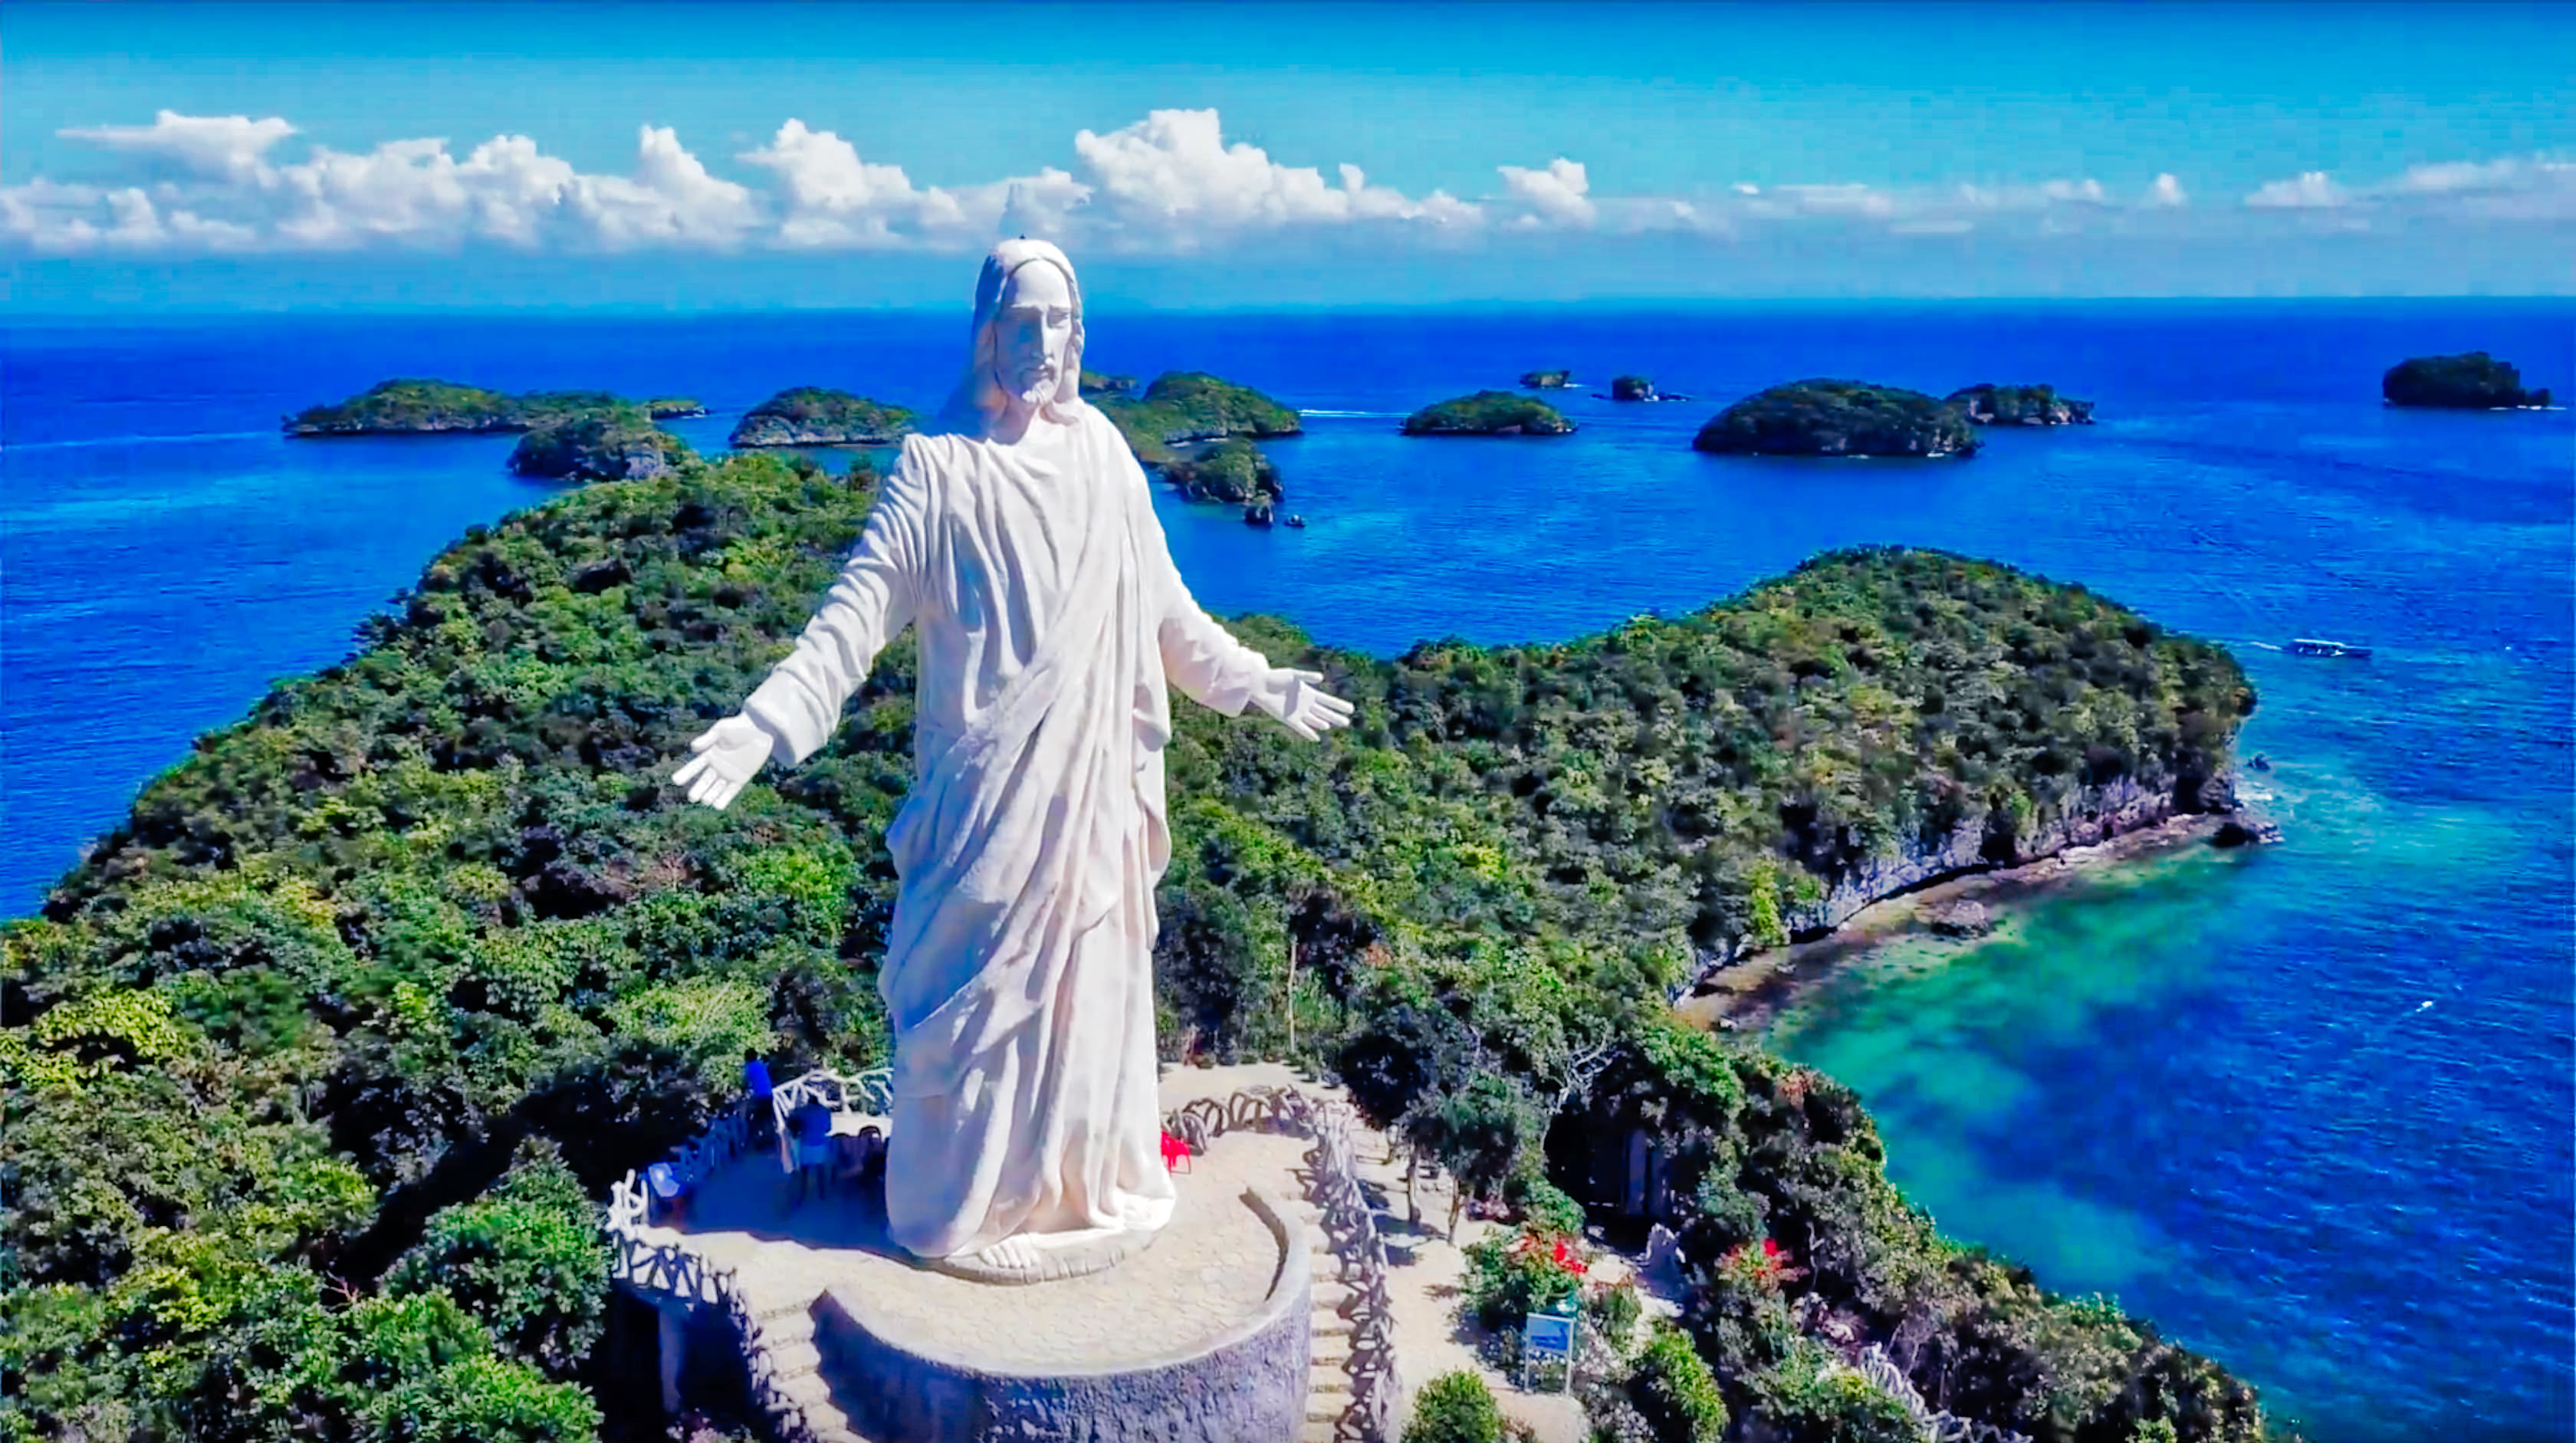 VIDEO: Christ the Savior Statue at Hundred Islands Philippines